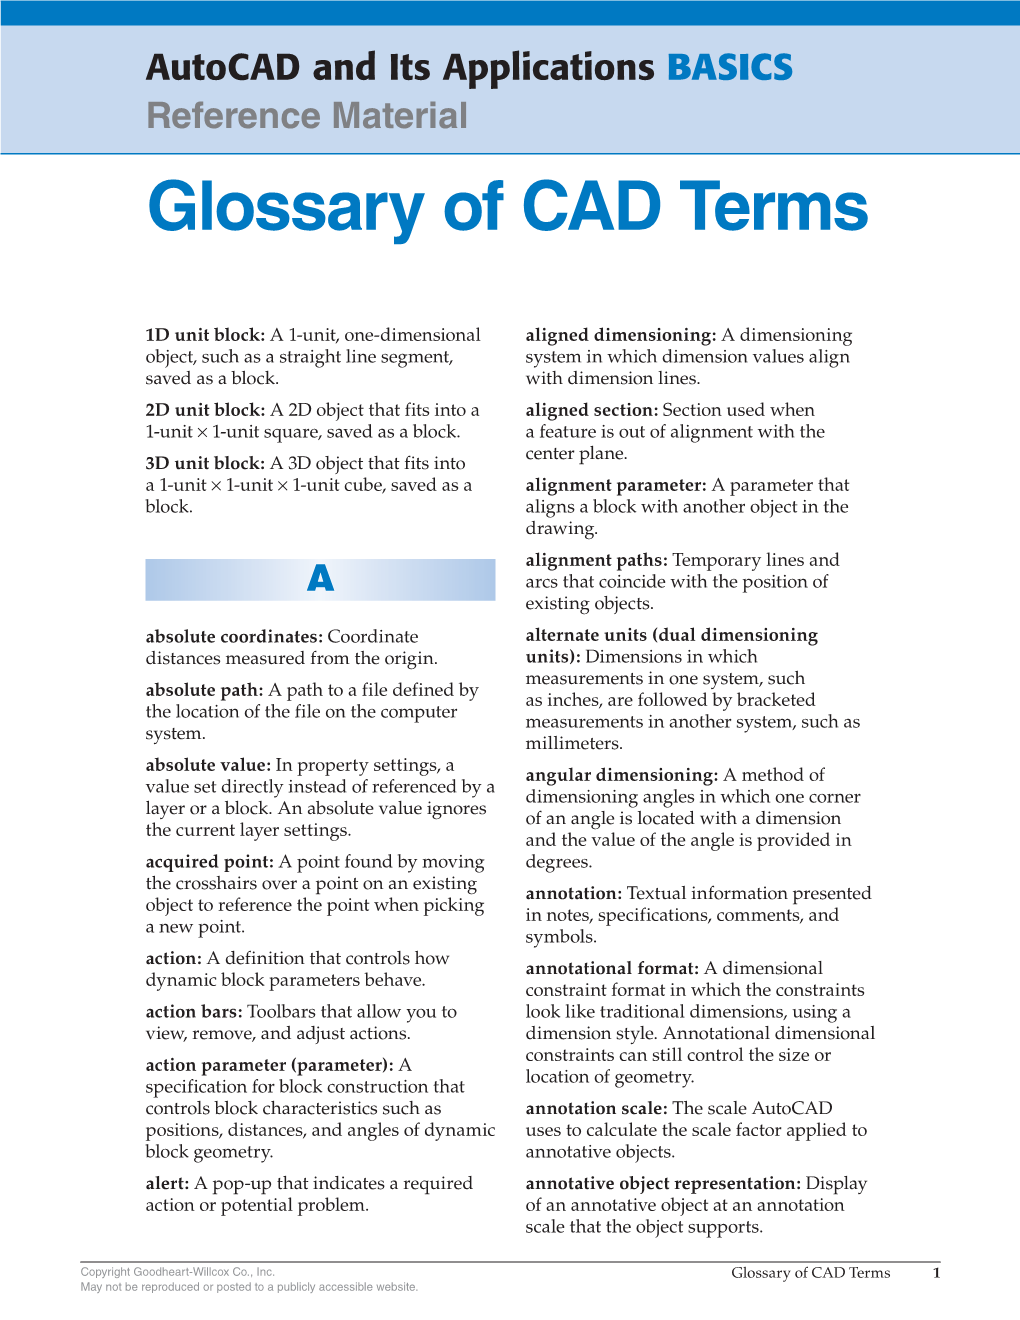 Glossary of CAD Terms